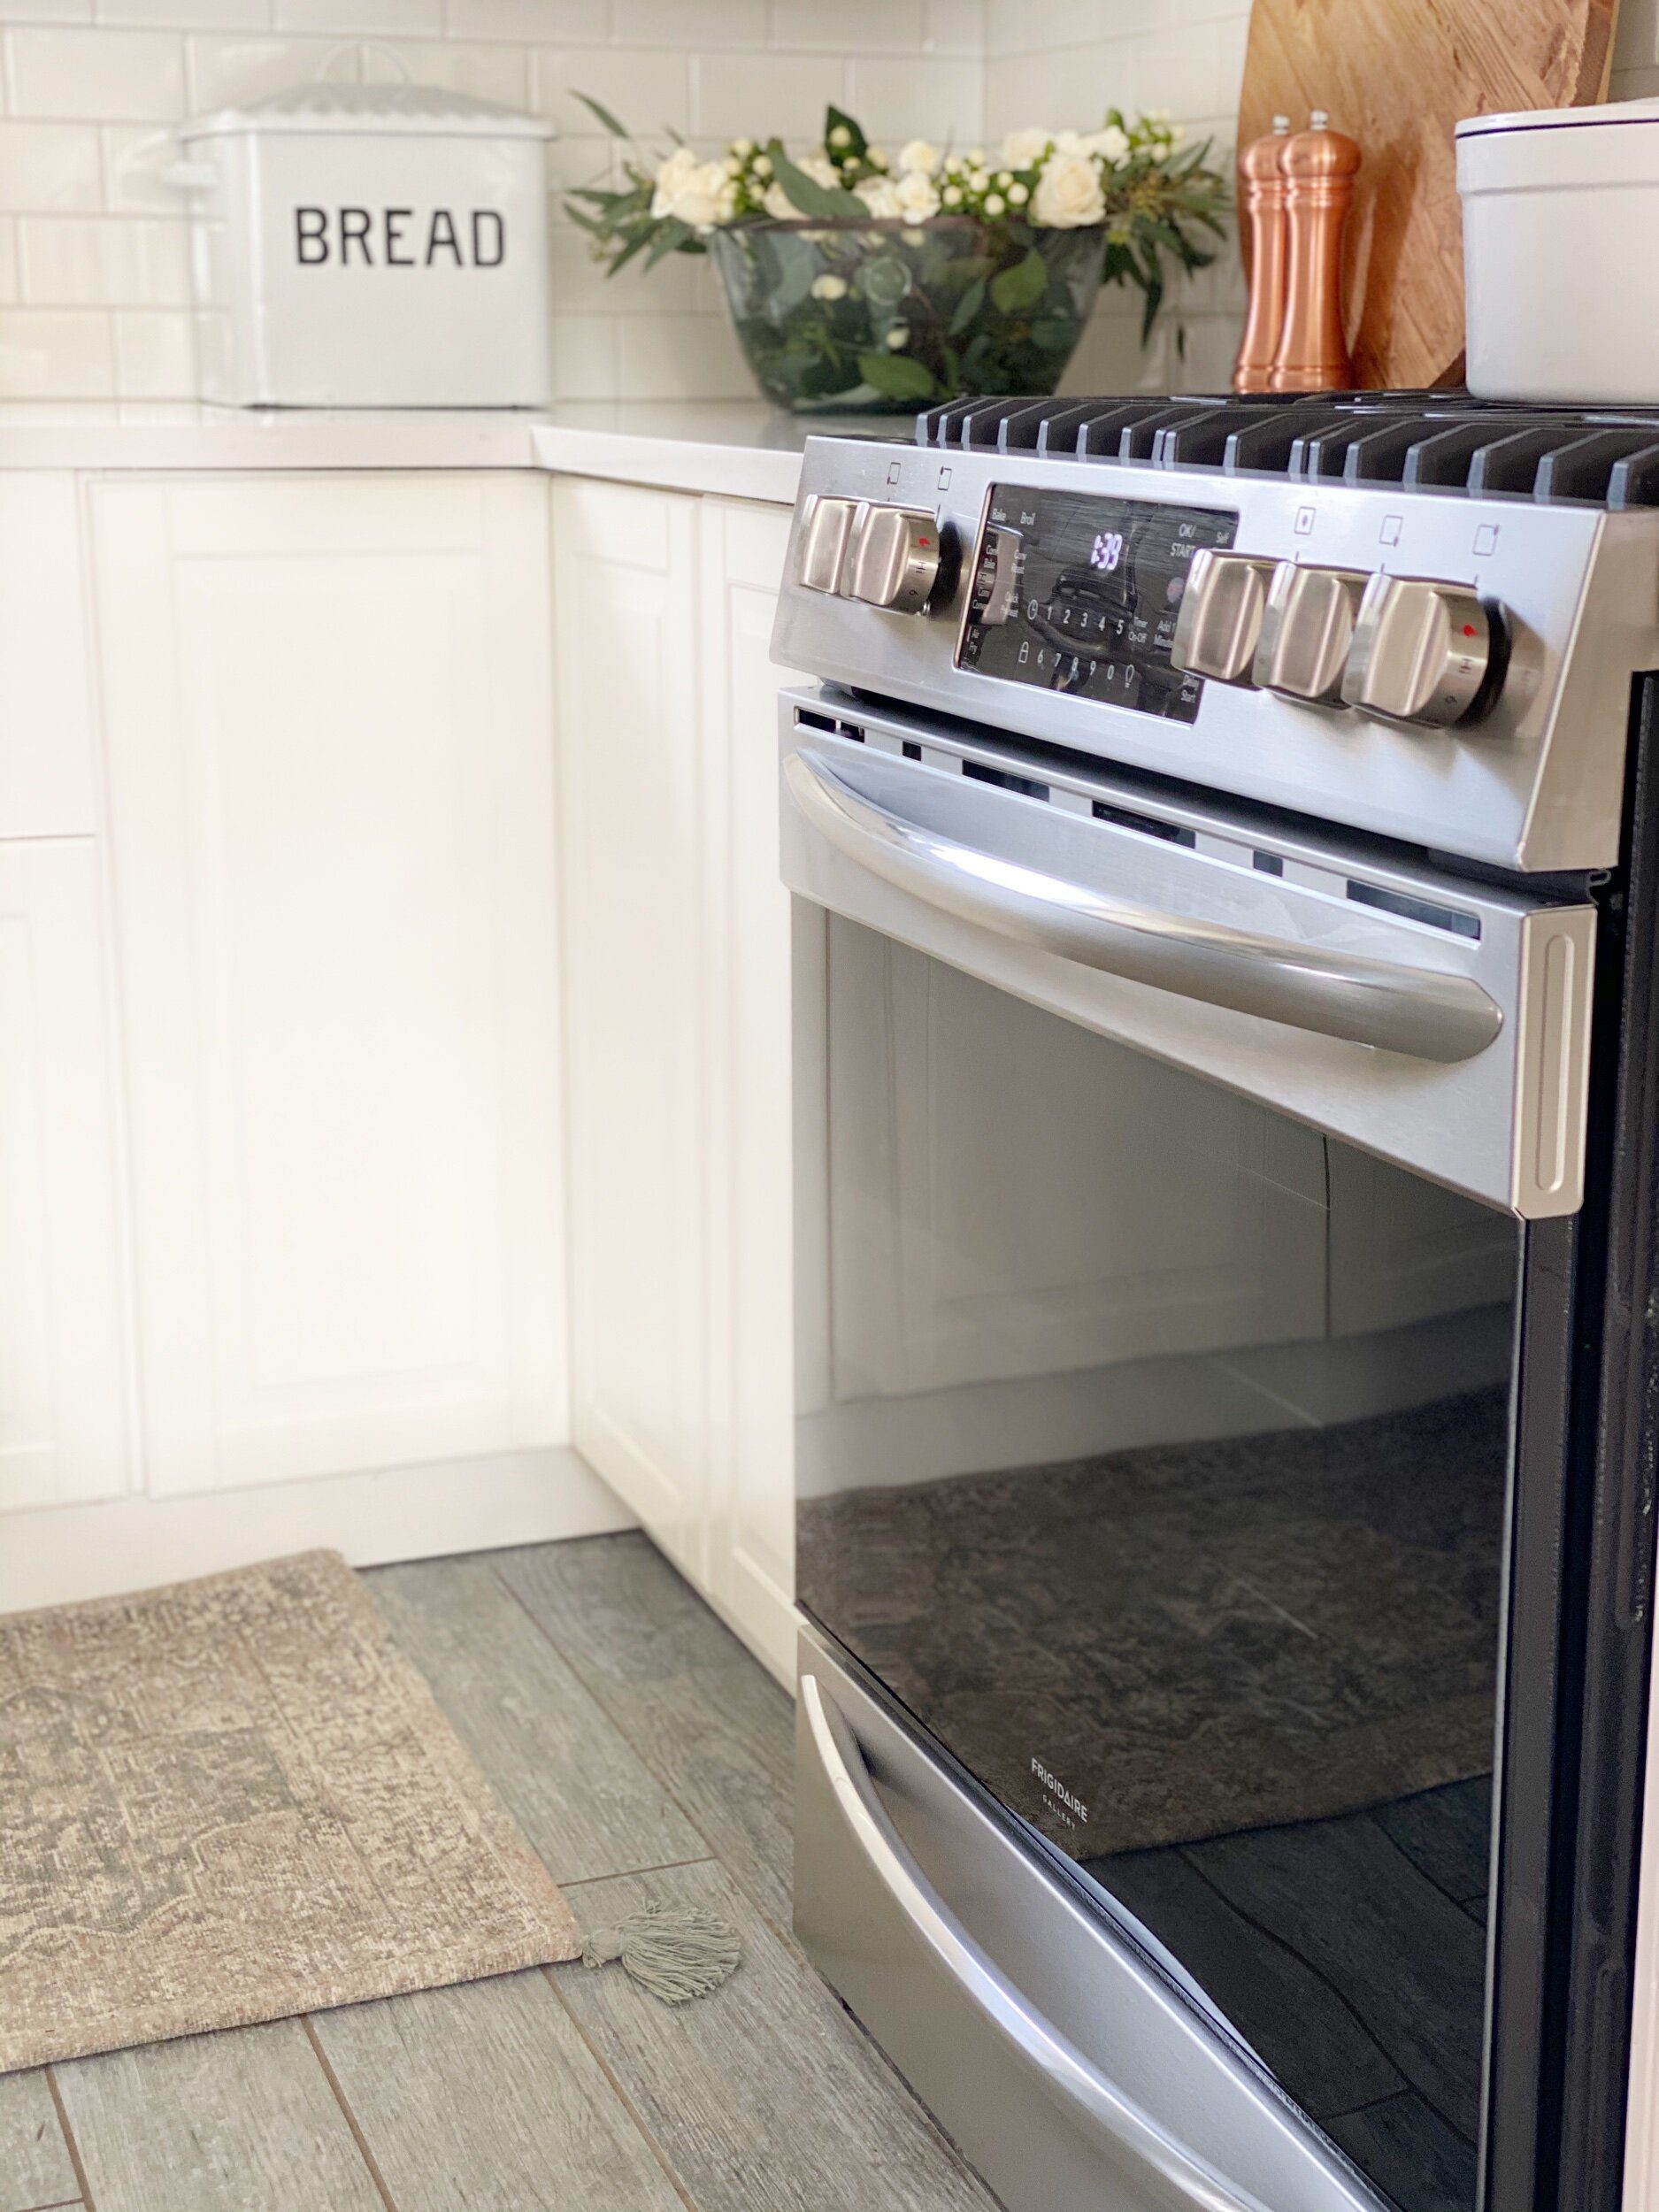 What is an Air Frying Oven? - Frigidaire